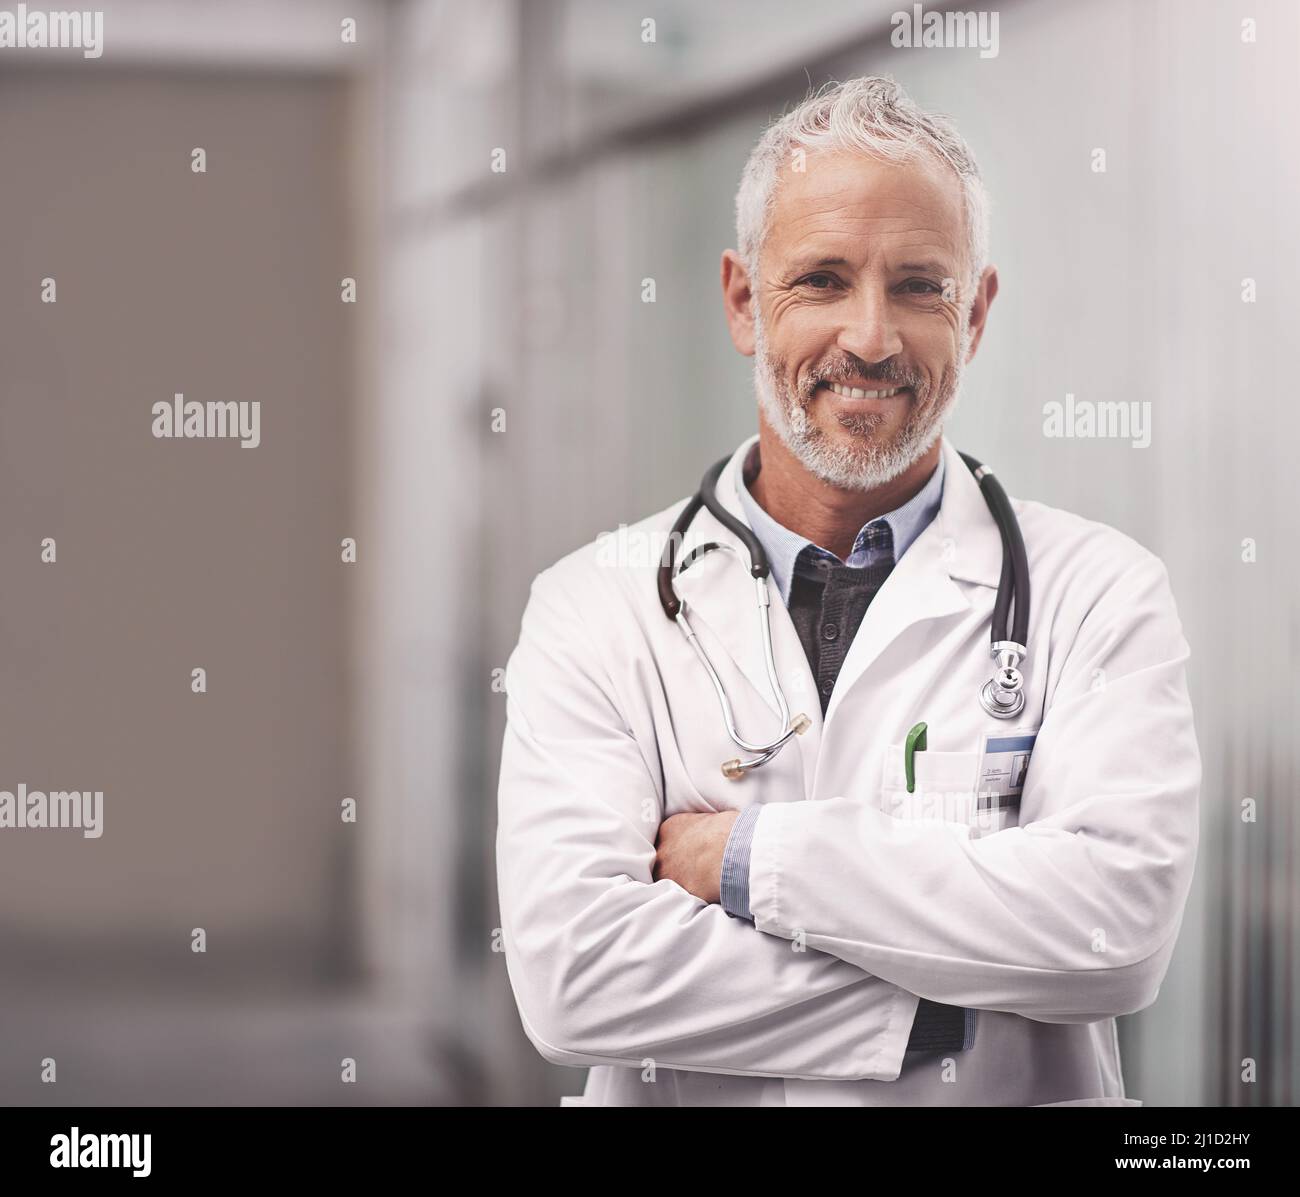 Let me help take care of your overall health. Portrait of a mature male doctor standing in a hospital. Stock Photo